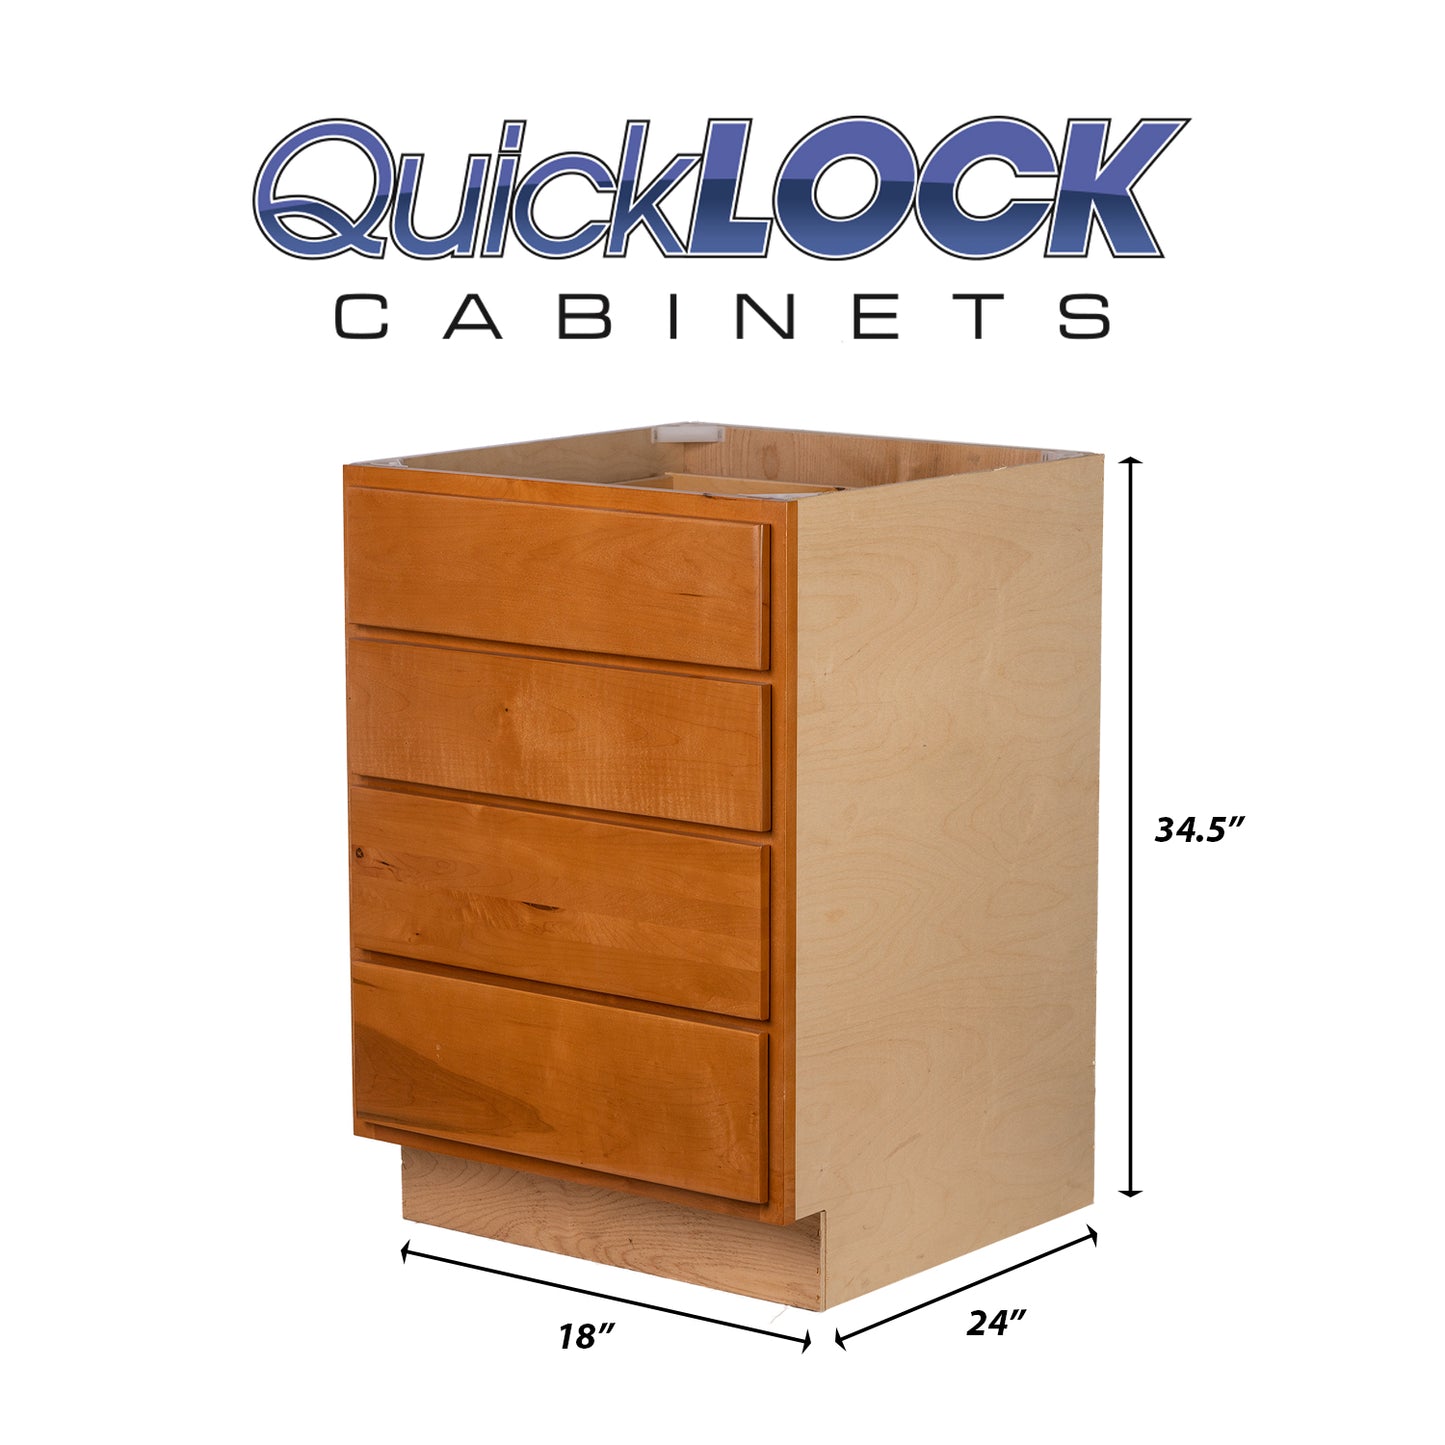 Quicklock RTA (Ready-to-Assemble) Provincial Stain 4 Drawer 18" Base Cabinet | 18"Wx34.5"Hx24"D